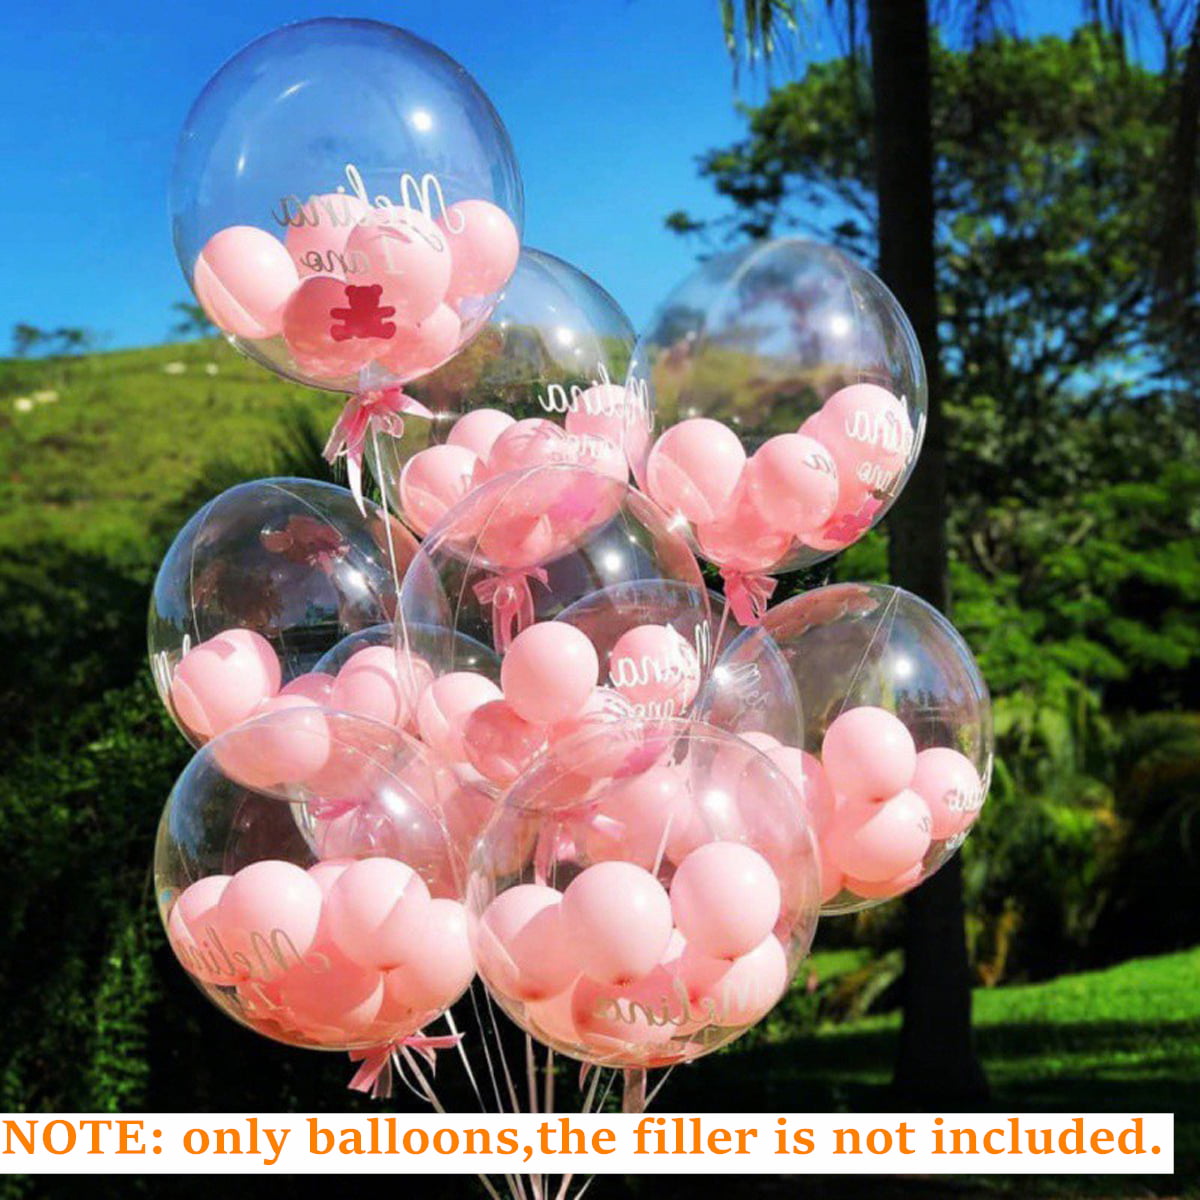  Large Clear Balloons for Stuffing, Pink Color 10pack 30inch Pre  Stretched Extra Wide Mouth BoBo Balloons, Crystal Wide Neck Clear Balloons  for Gift Wrapping Kids Birthday Party Decoration : Toys 